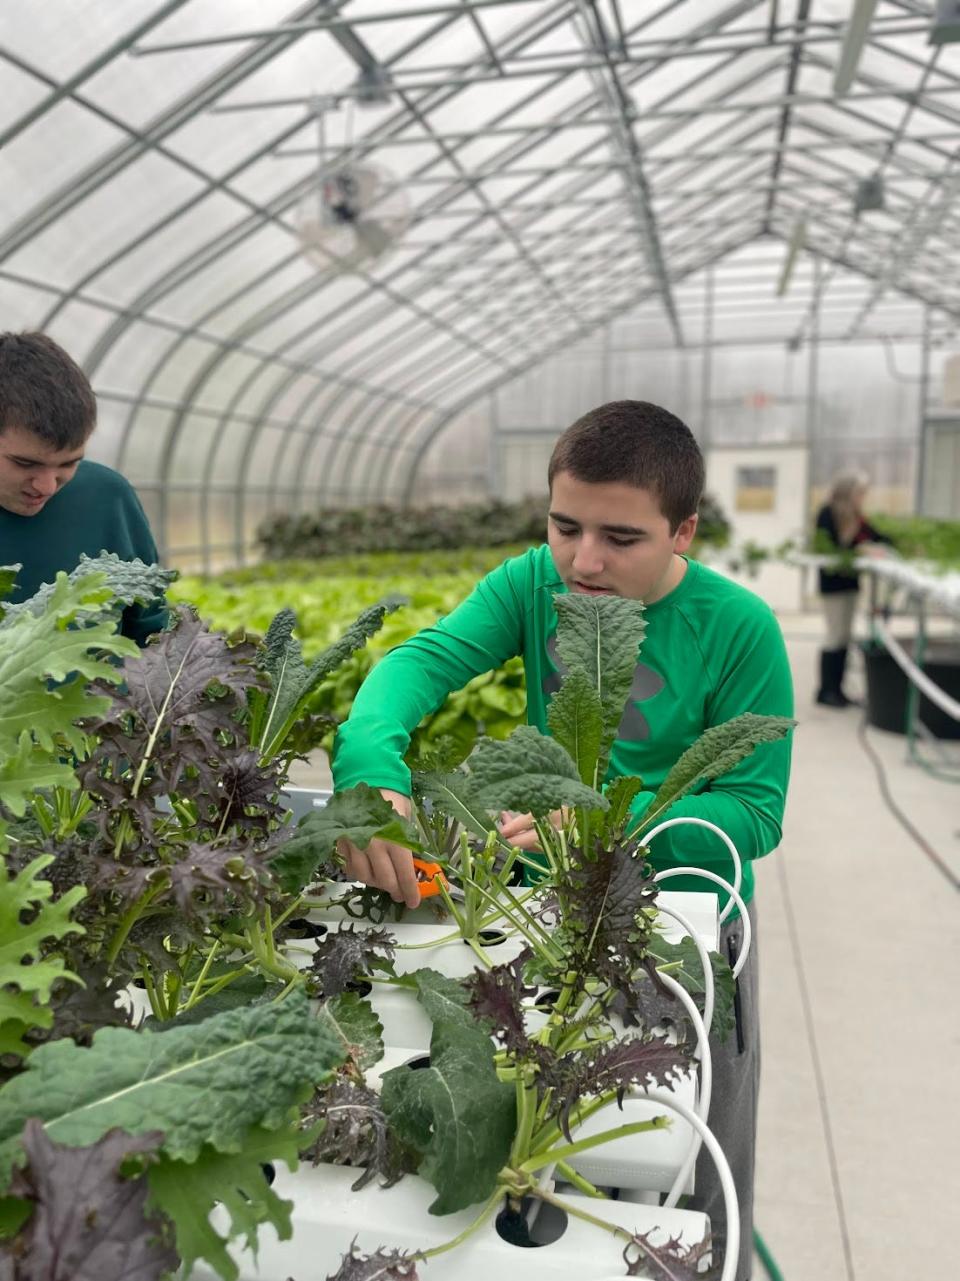 Dylan, 16, a student at Somerset Hills Learning Institute in Bedminster, works at the school’s social enterprise Three Meadows Farm. He and his fellow students have brought a new product, Paradise Salad, to ShopRite of Chester, their first retail partner.